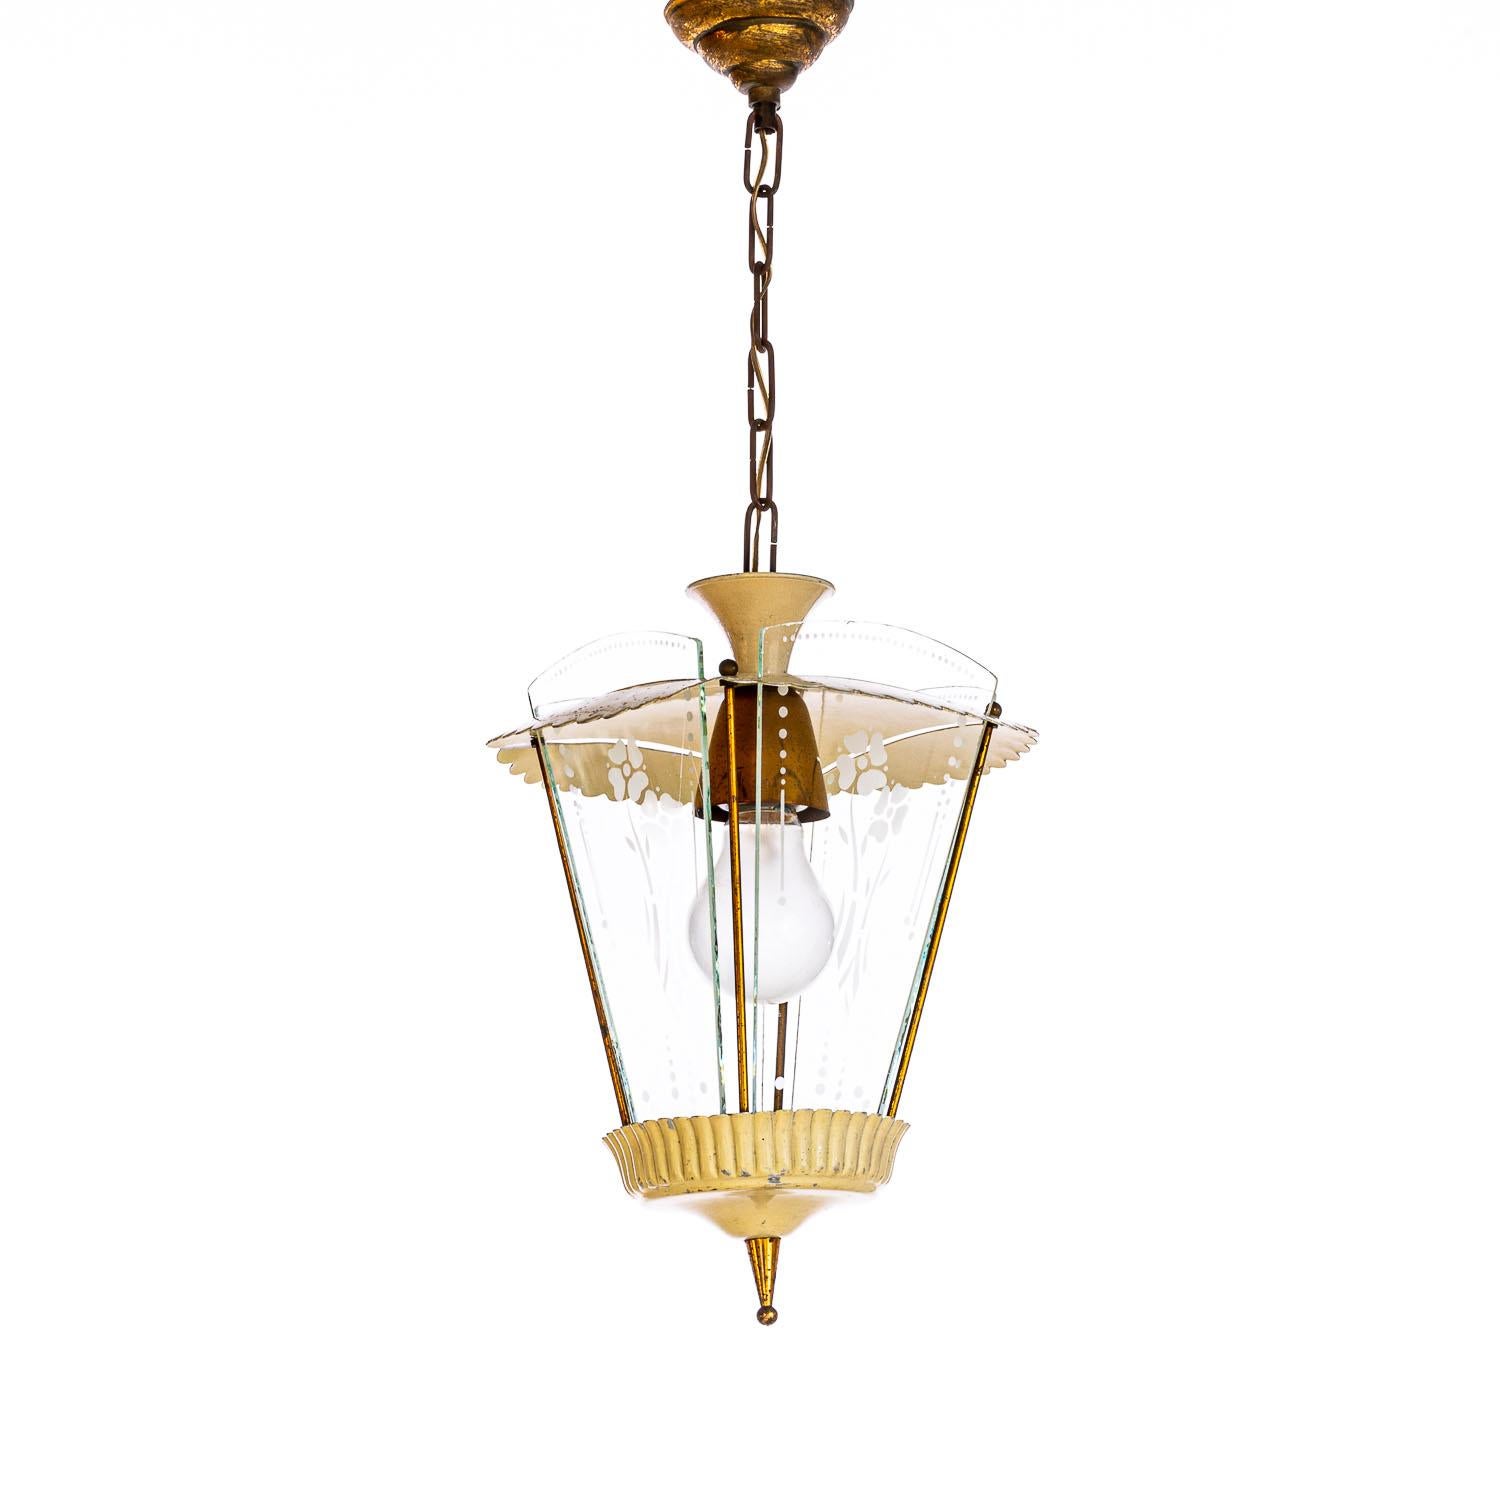 1950's Steel, Brass & Glass Lantern in Style of Pietro Chiesa For Sale 3